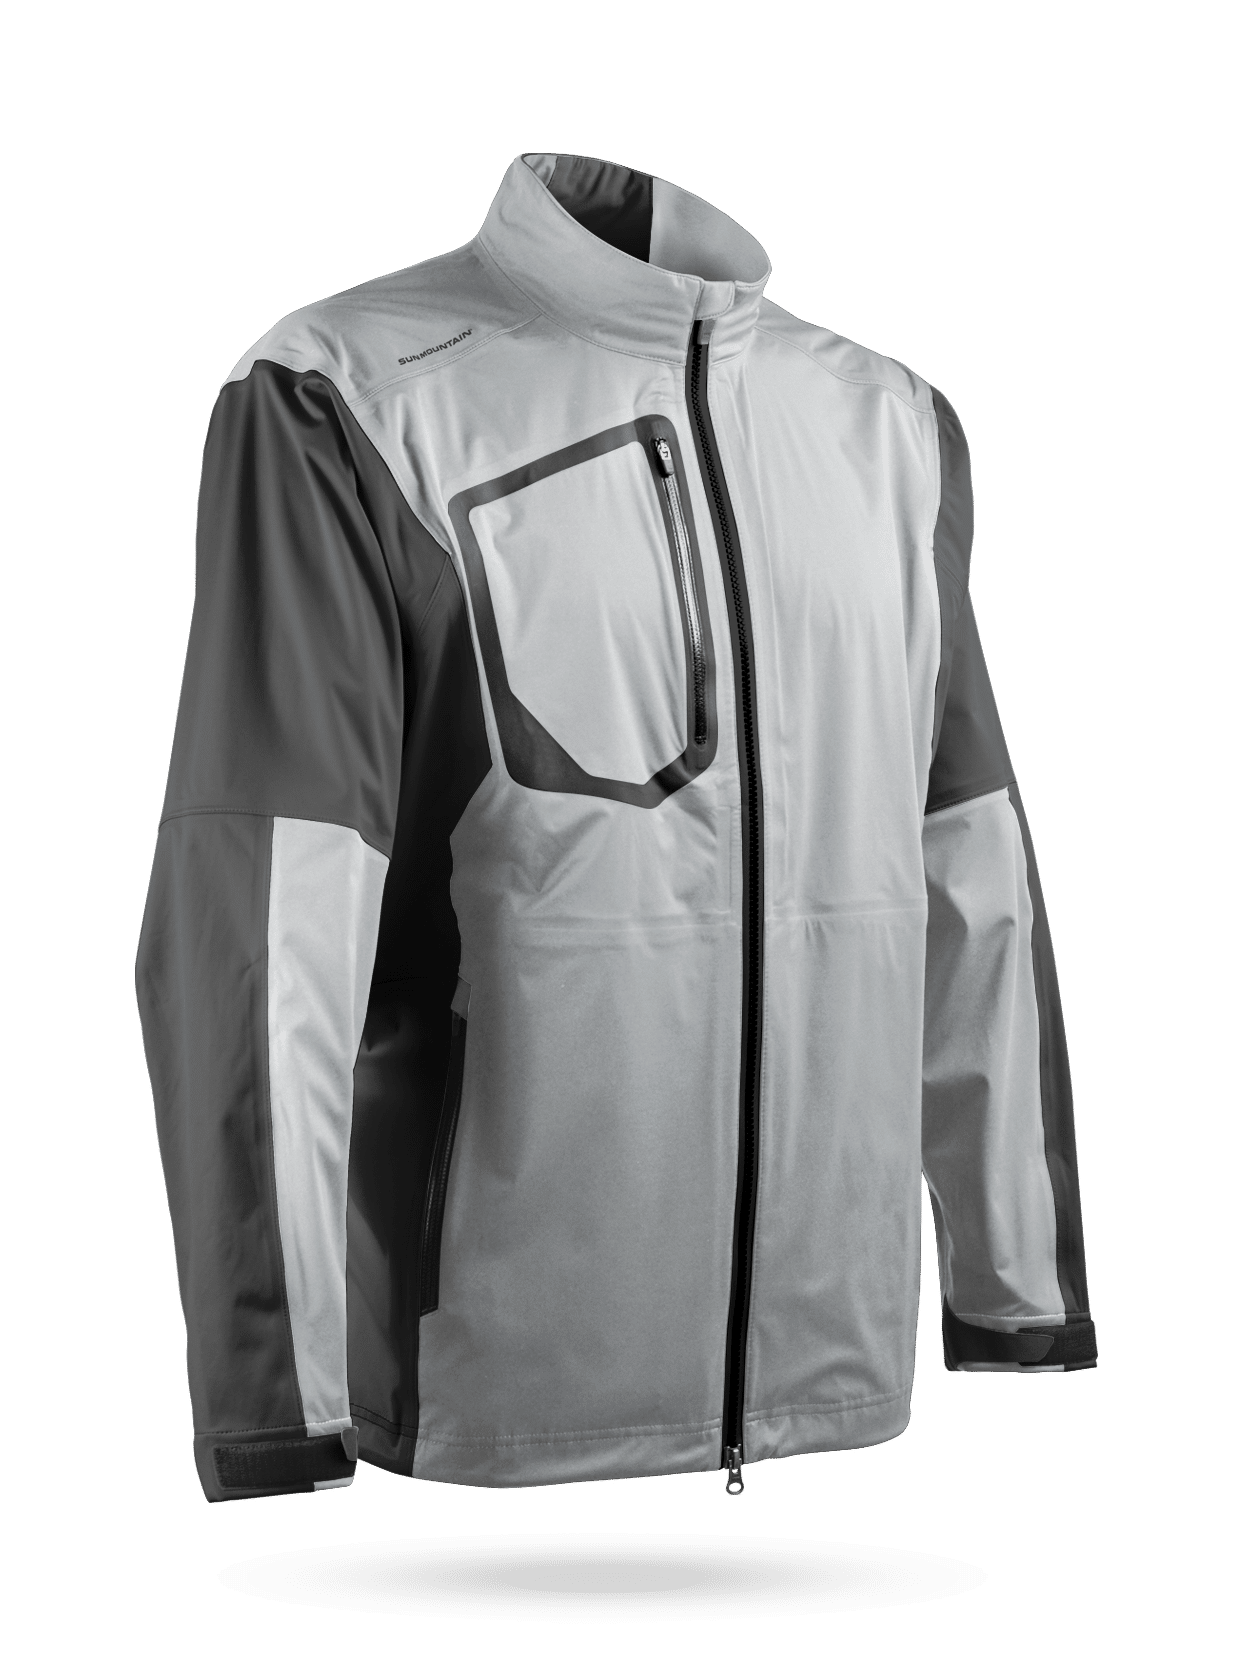 Read more about the article Sun Mountain Elite Jacket for the Golfer who “Must Have”